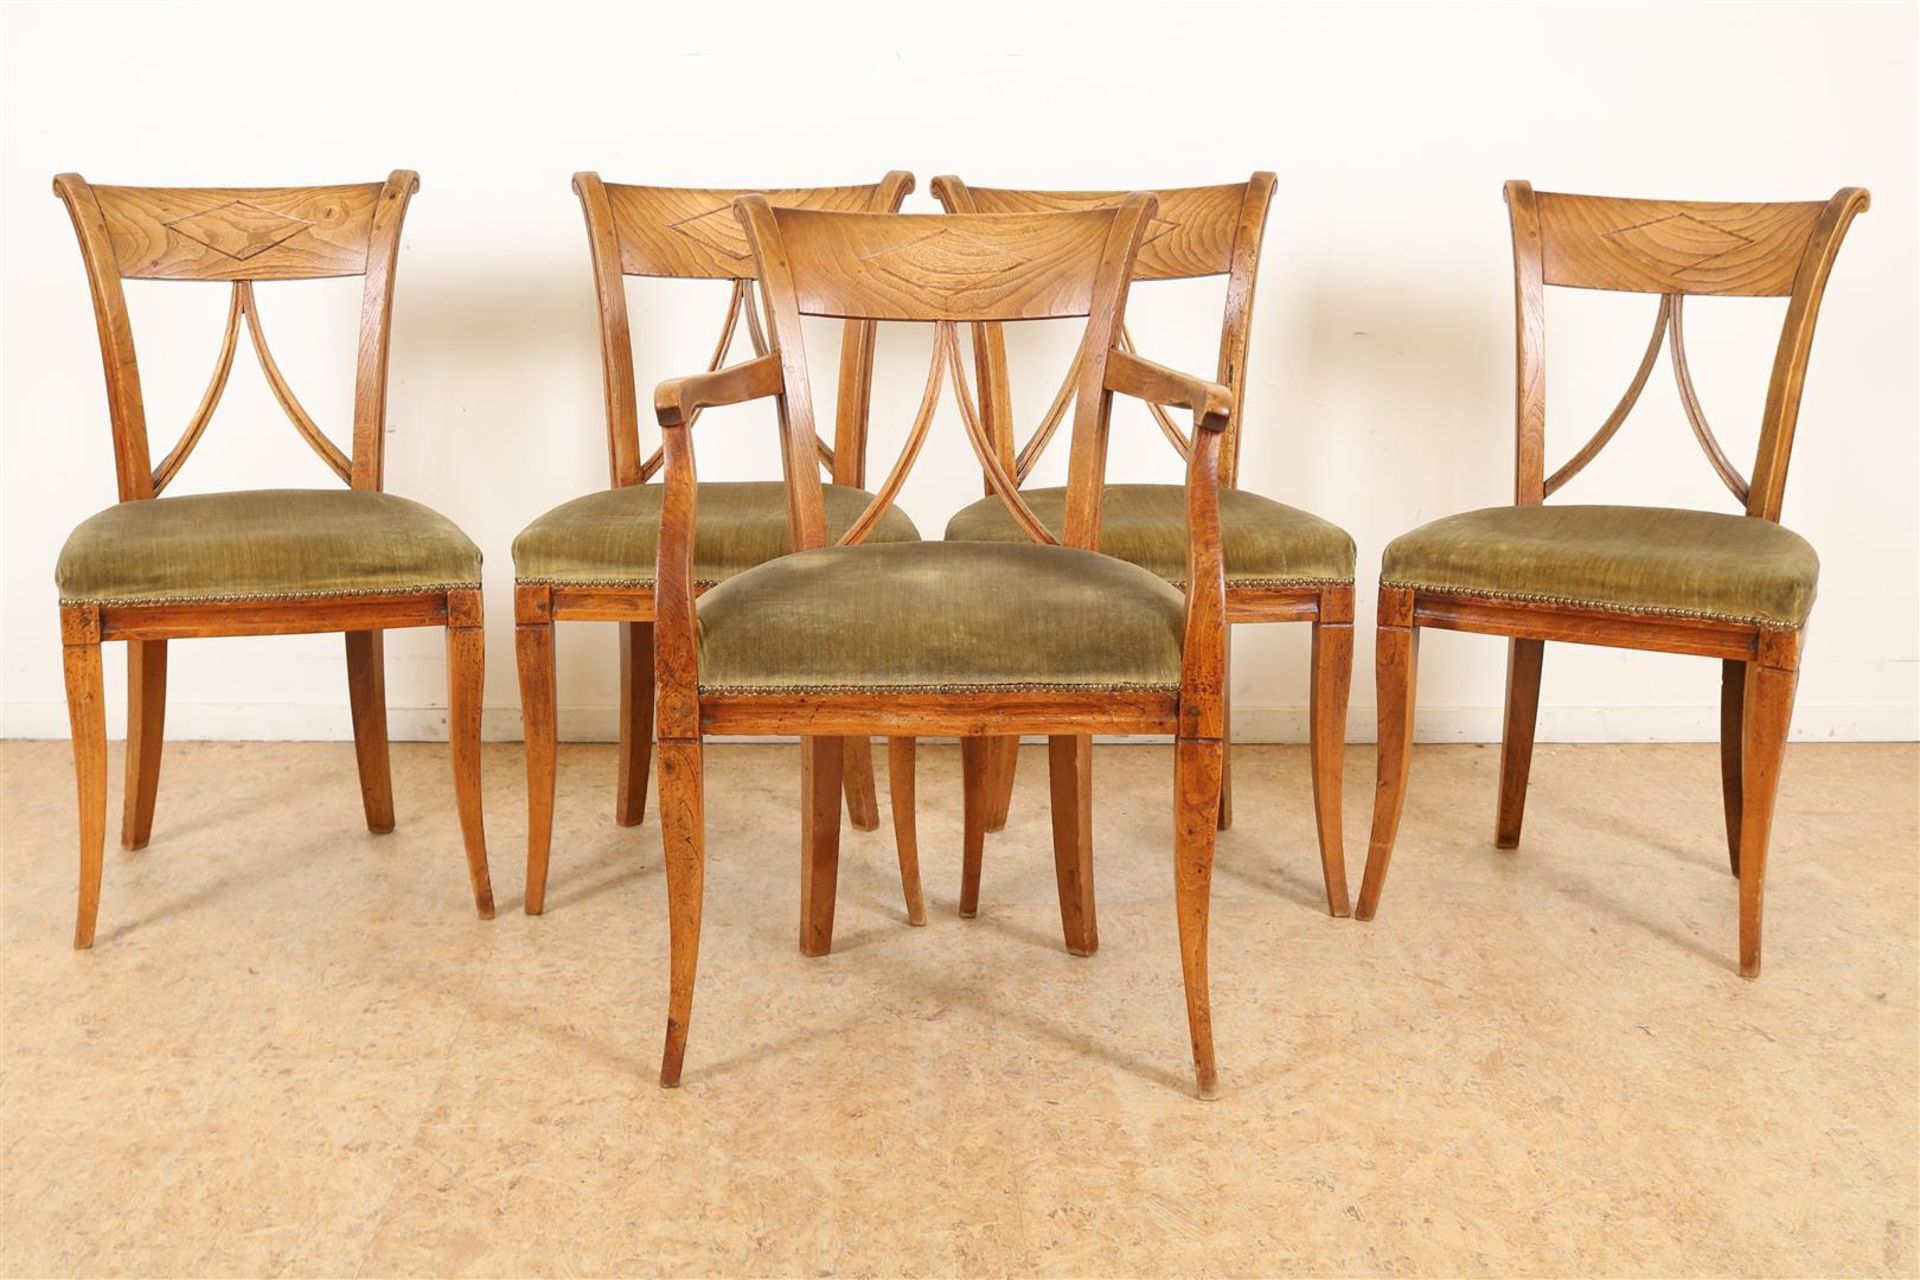 Series of 5 elm wood Louis XVI chairs with green velvet seat and openwork backrest, including 1